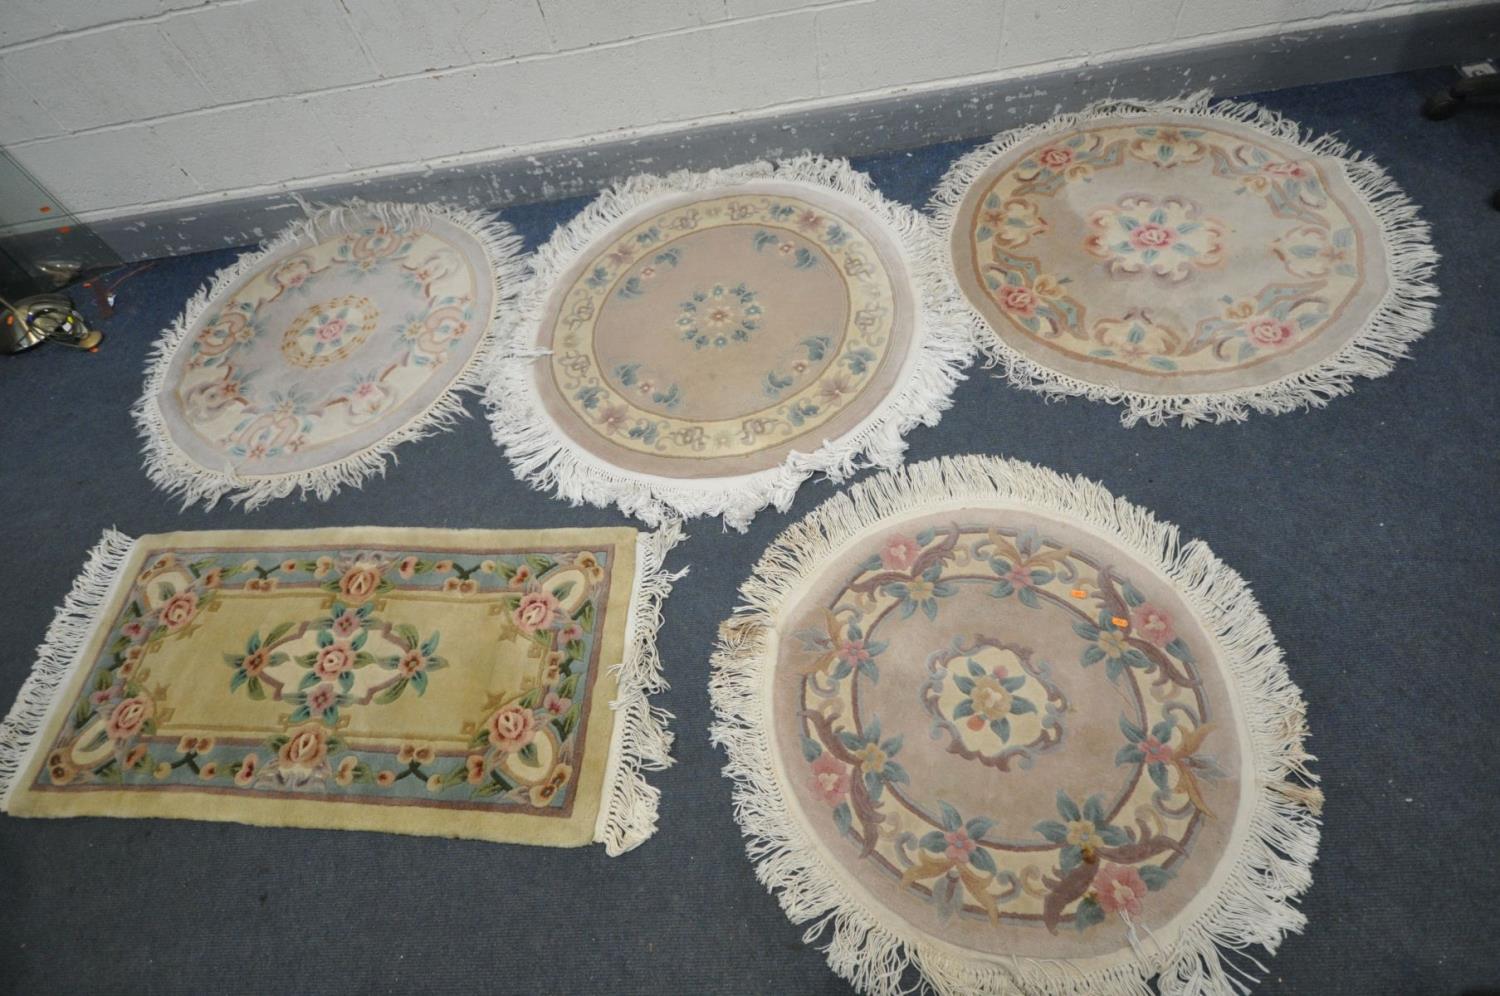 FOUR CIRCULAR WOOLEN RUGS, all various patterns and a rectangular woollen rug (condition - in need